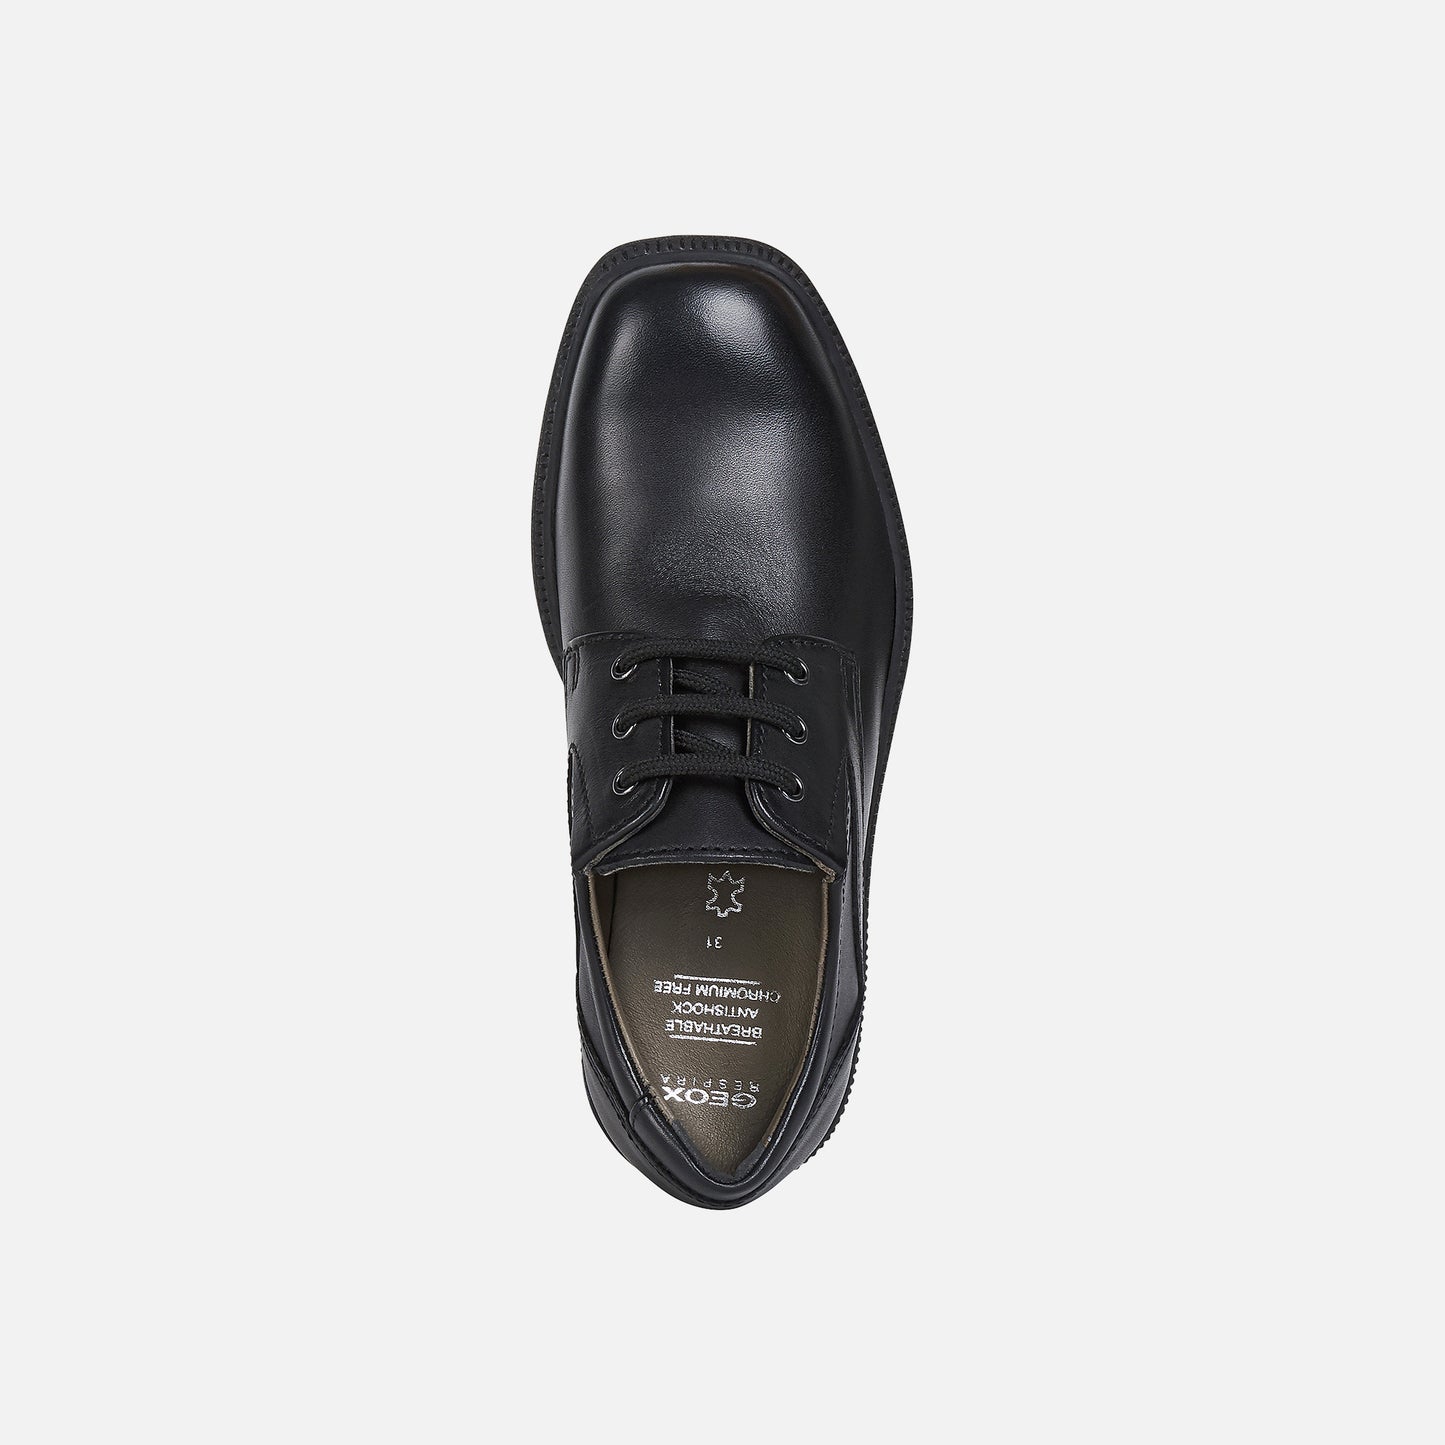 A boys smart school shoe by Geox,style J Federico, in black with lace fastening. Above view.